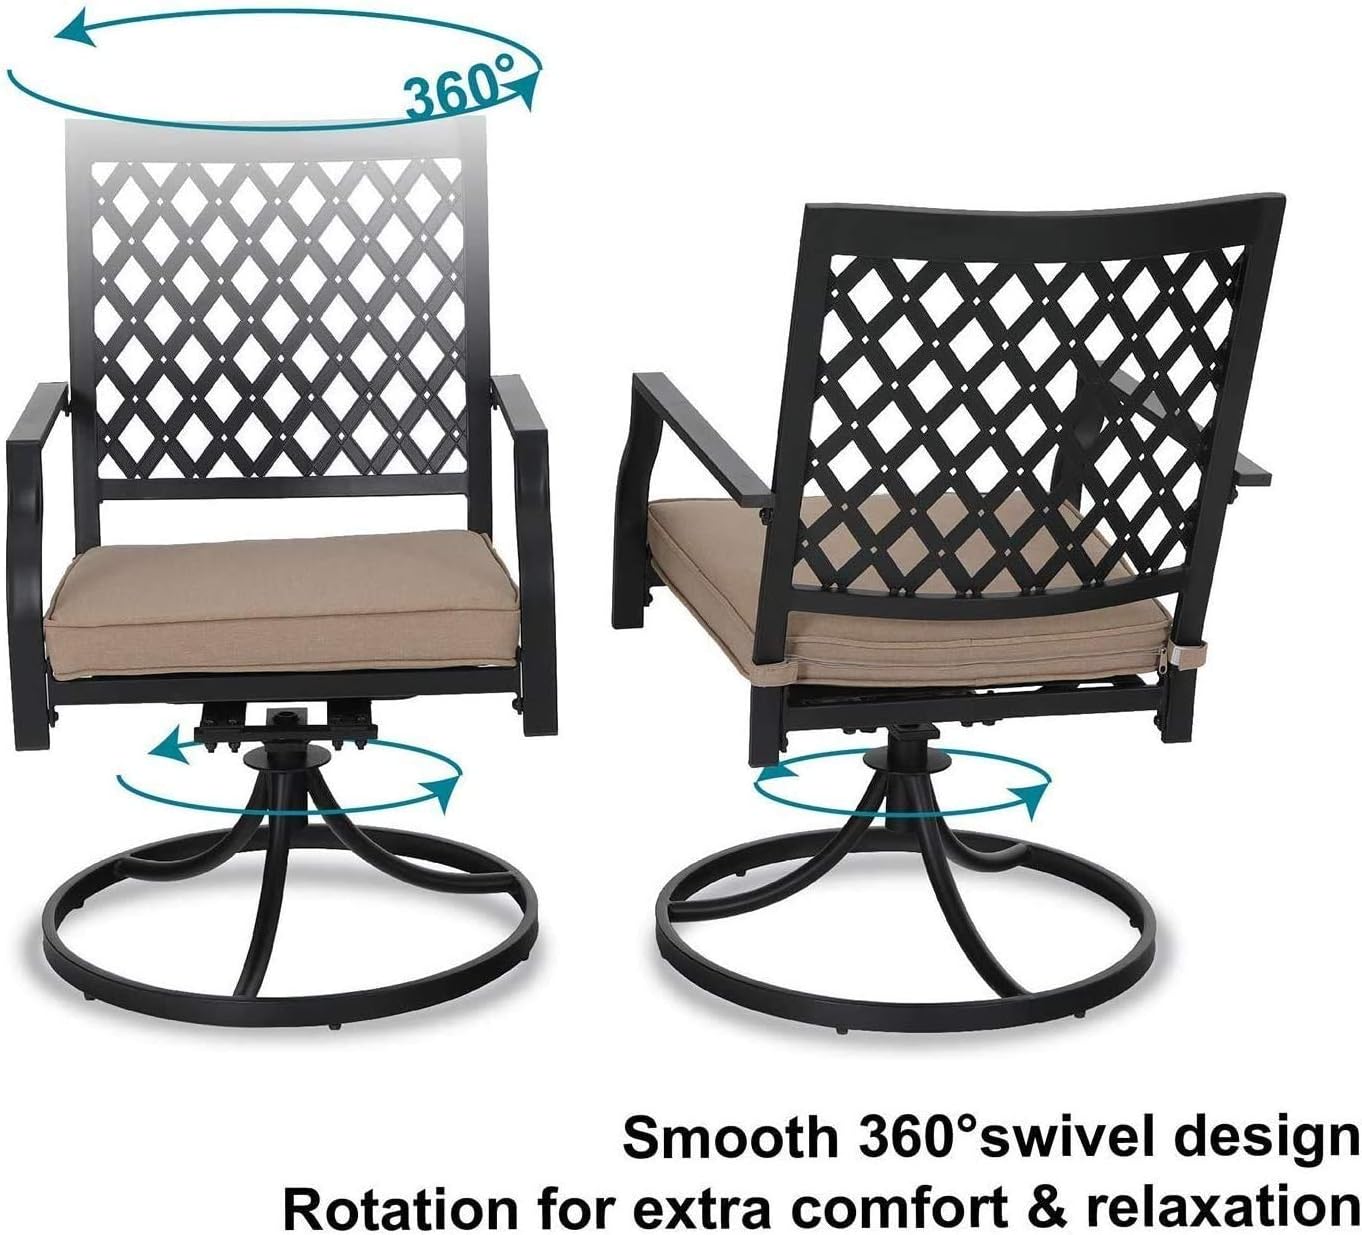 PHI VILLA Outdoor Metal Swivel Chairs Set of 2 Patio Dining Chair with Cushion Furniture Set for Garden Backyard Bistro, Small Grid, Black